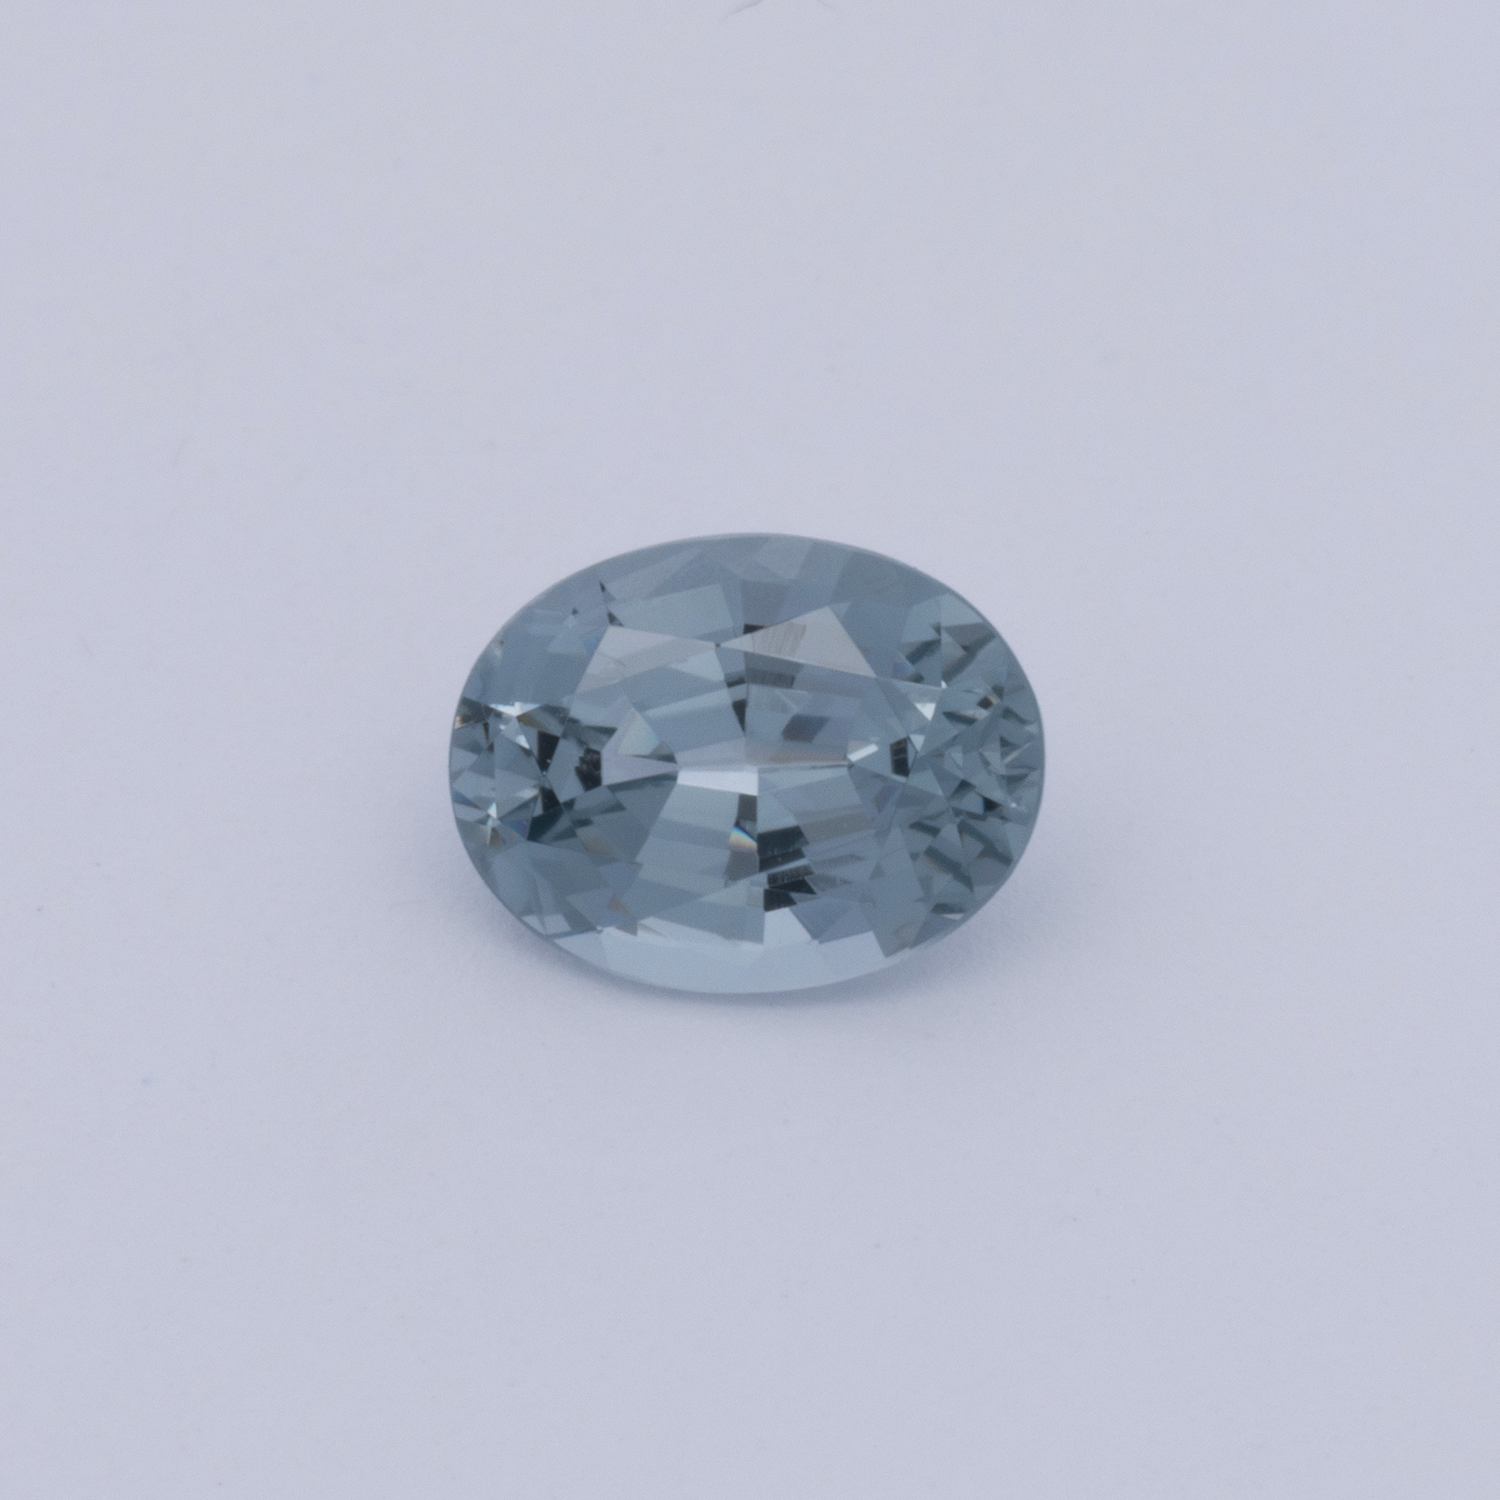 Spinell - grau, oval, 7.3x5.6 mm, 1.16 cts, Nr. SP90098